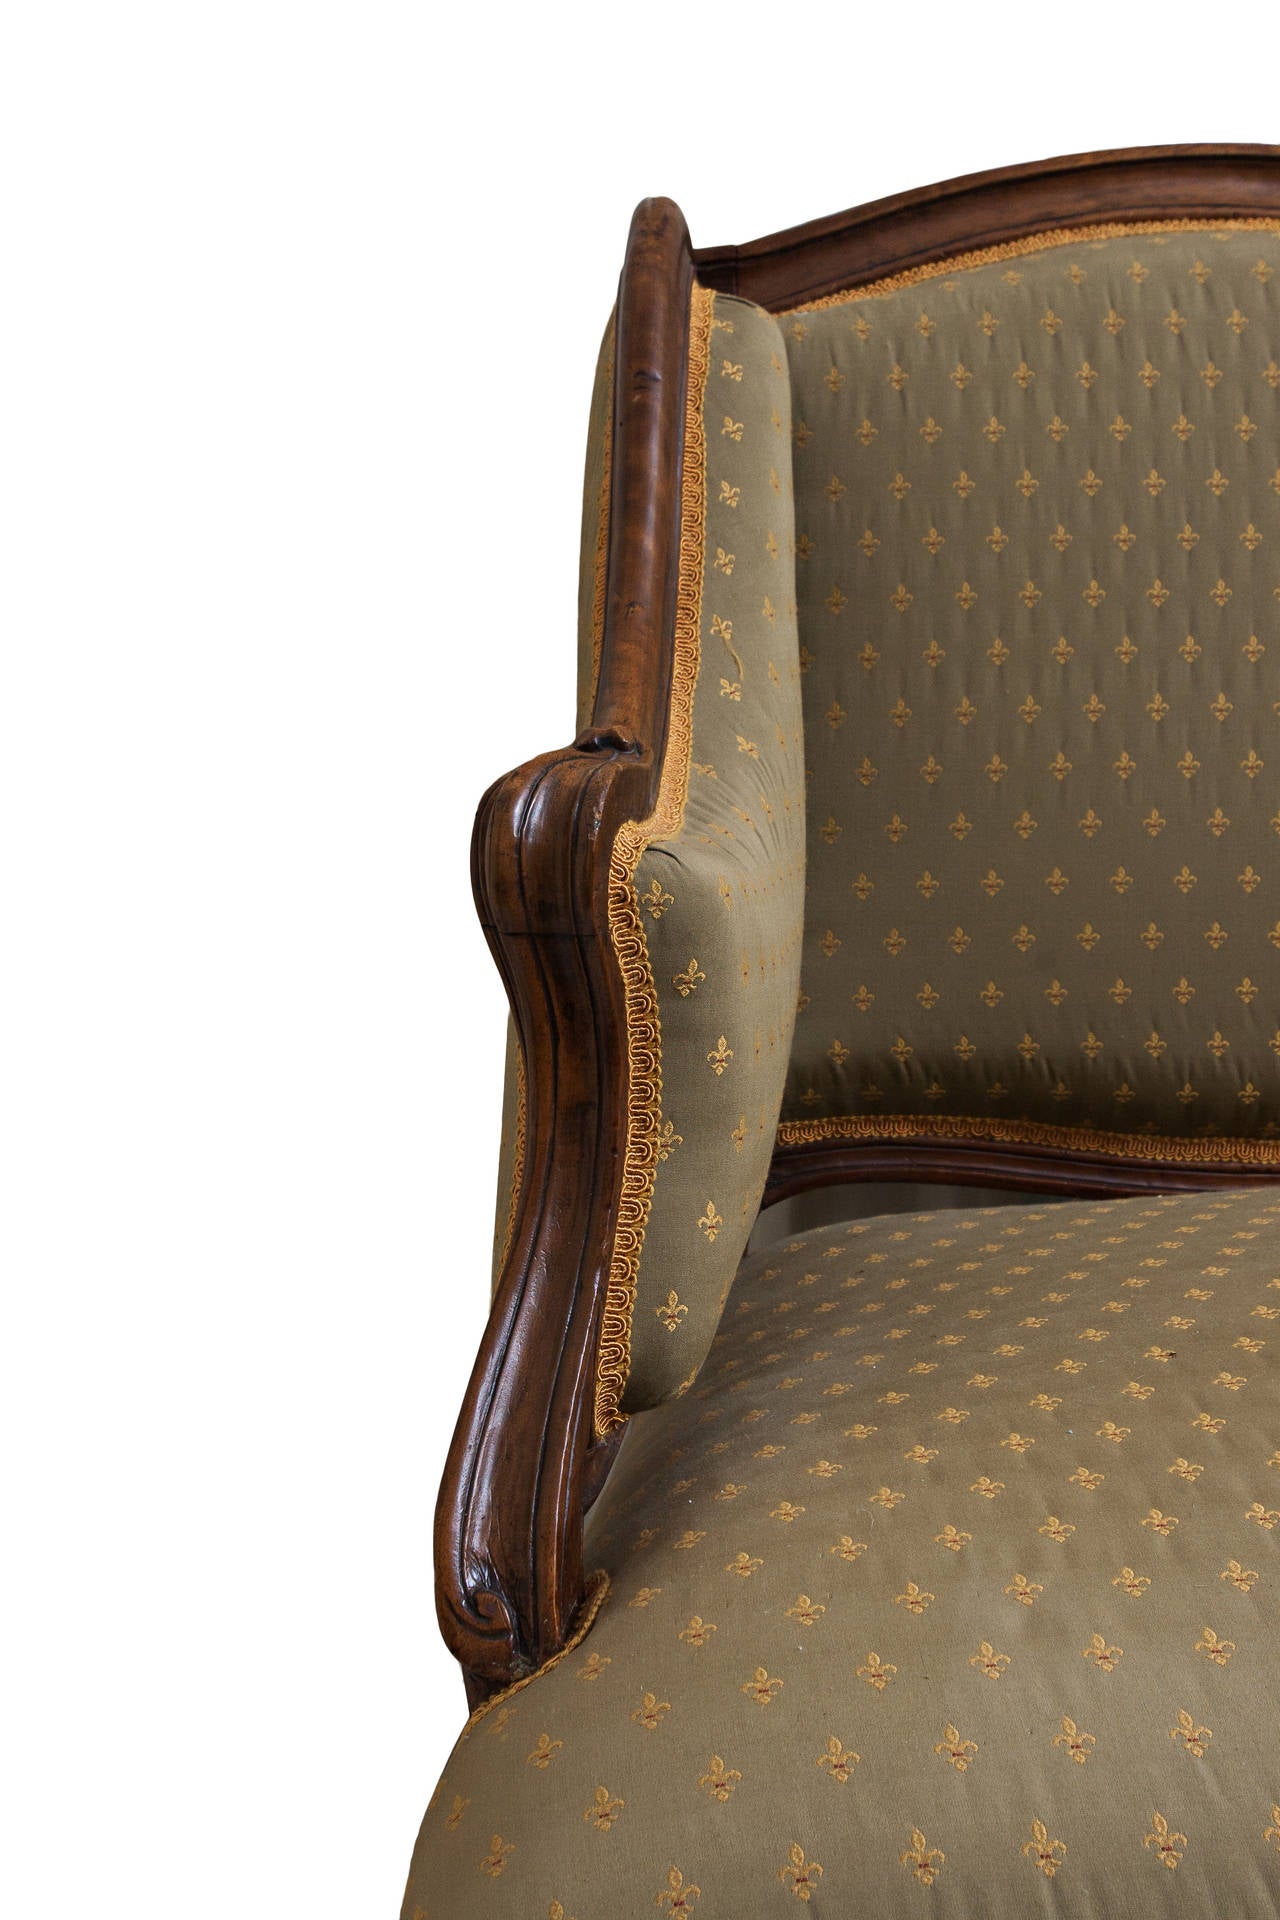 A long Louis XV style settee with Fleur De Lis upholstery. Beautiful golden trim on upholstery leading to the dark wood frame.